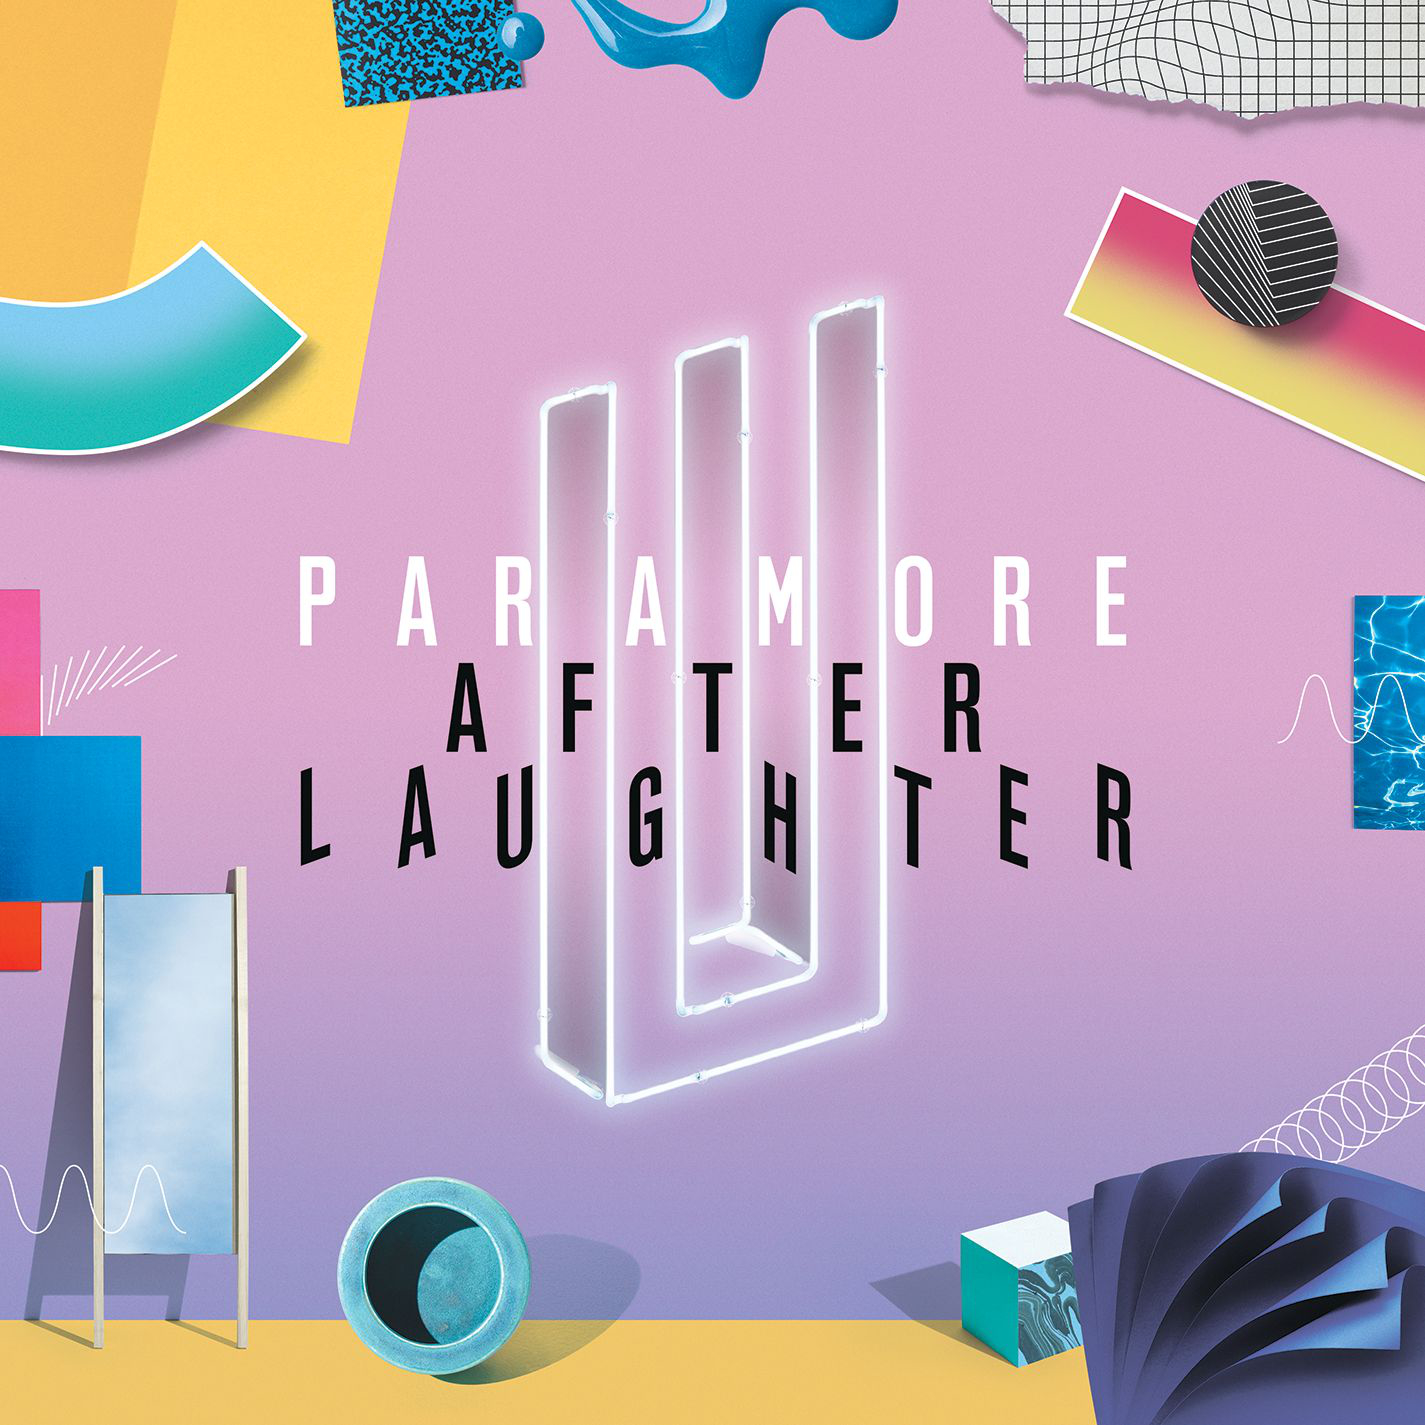 Paramore - After Laughter (2017) [HDTracks FLAC 24bit/96kHz]